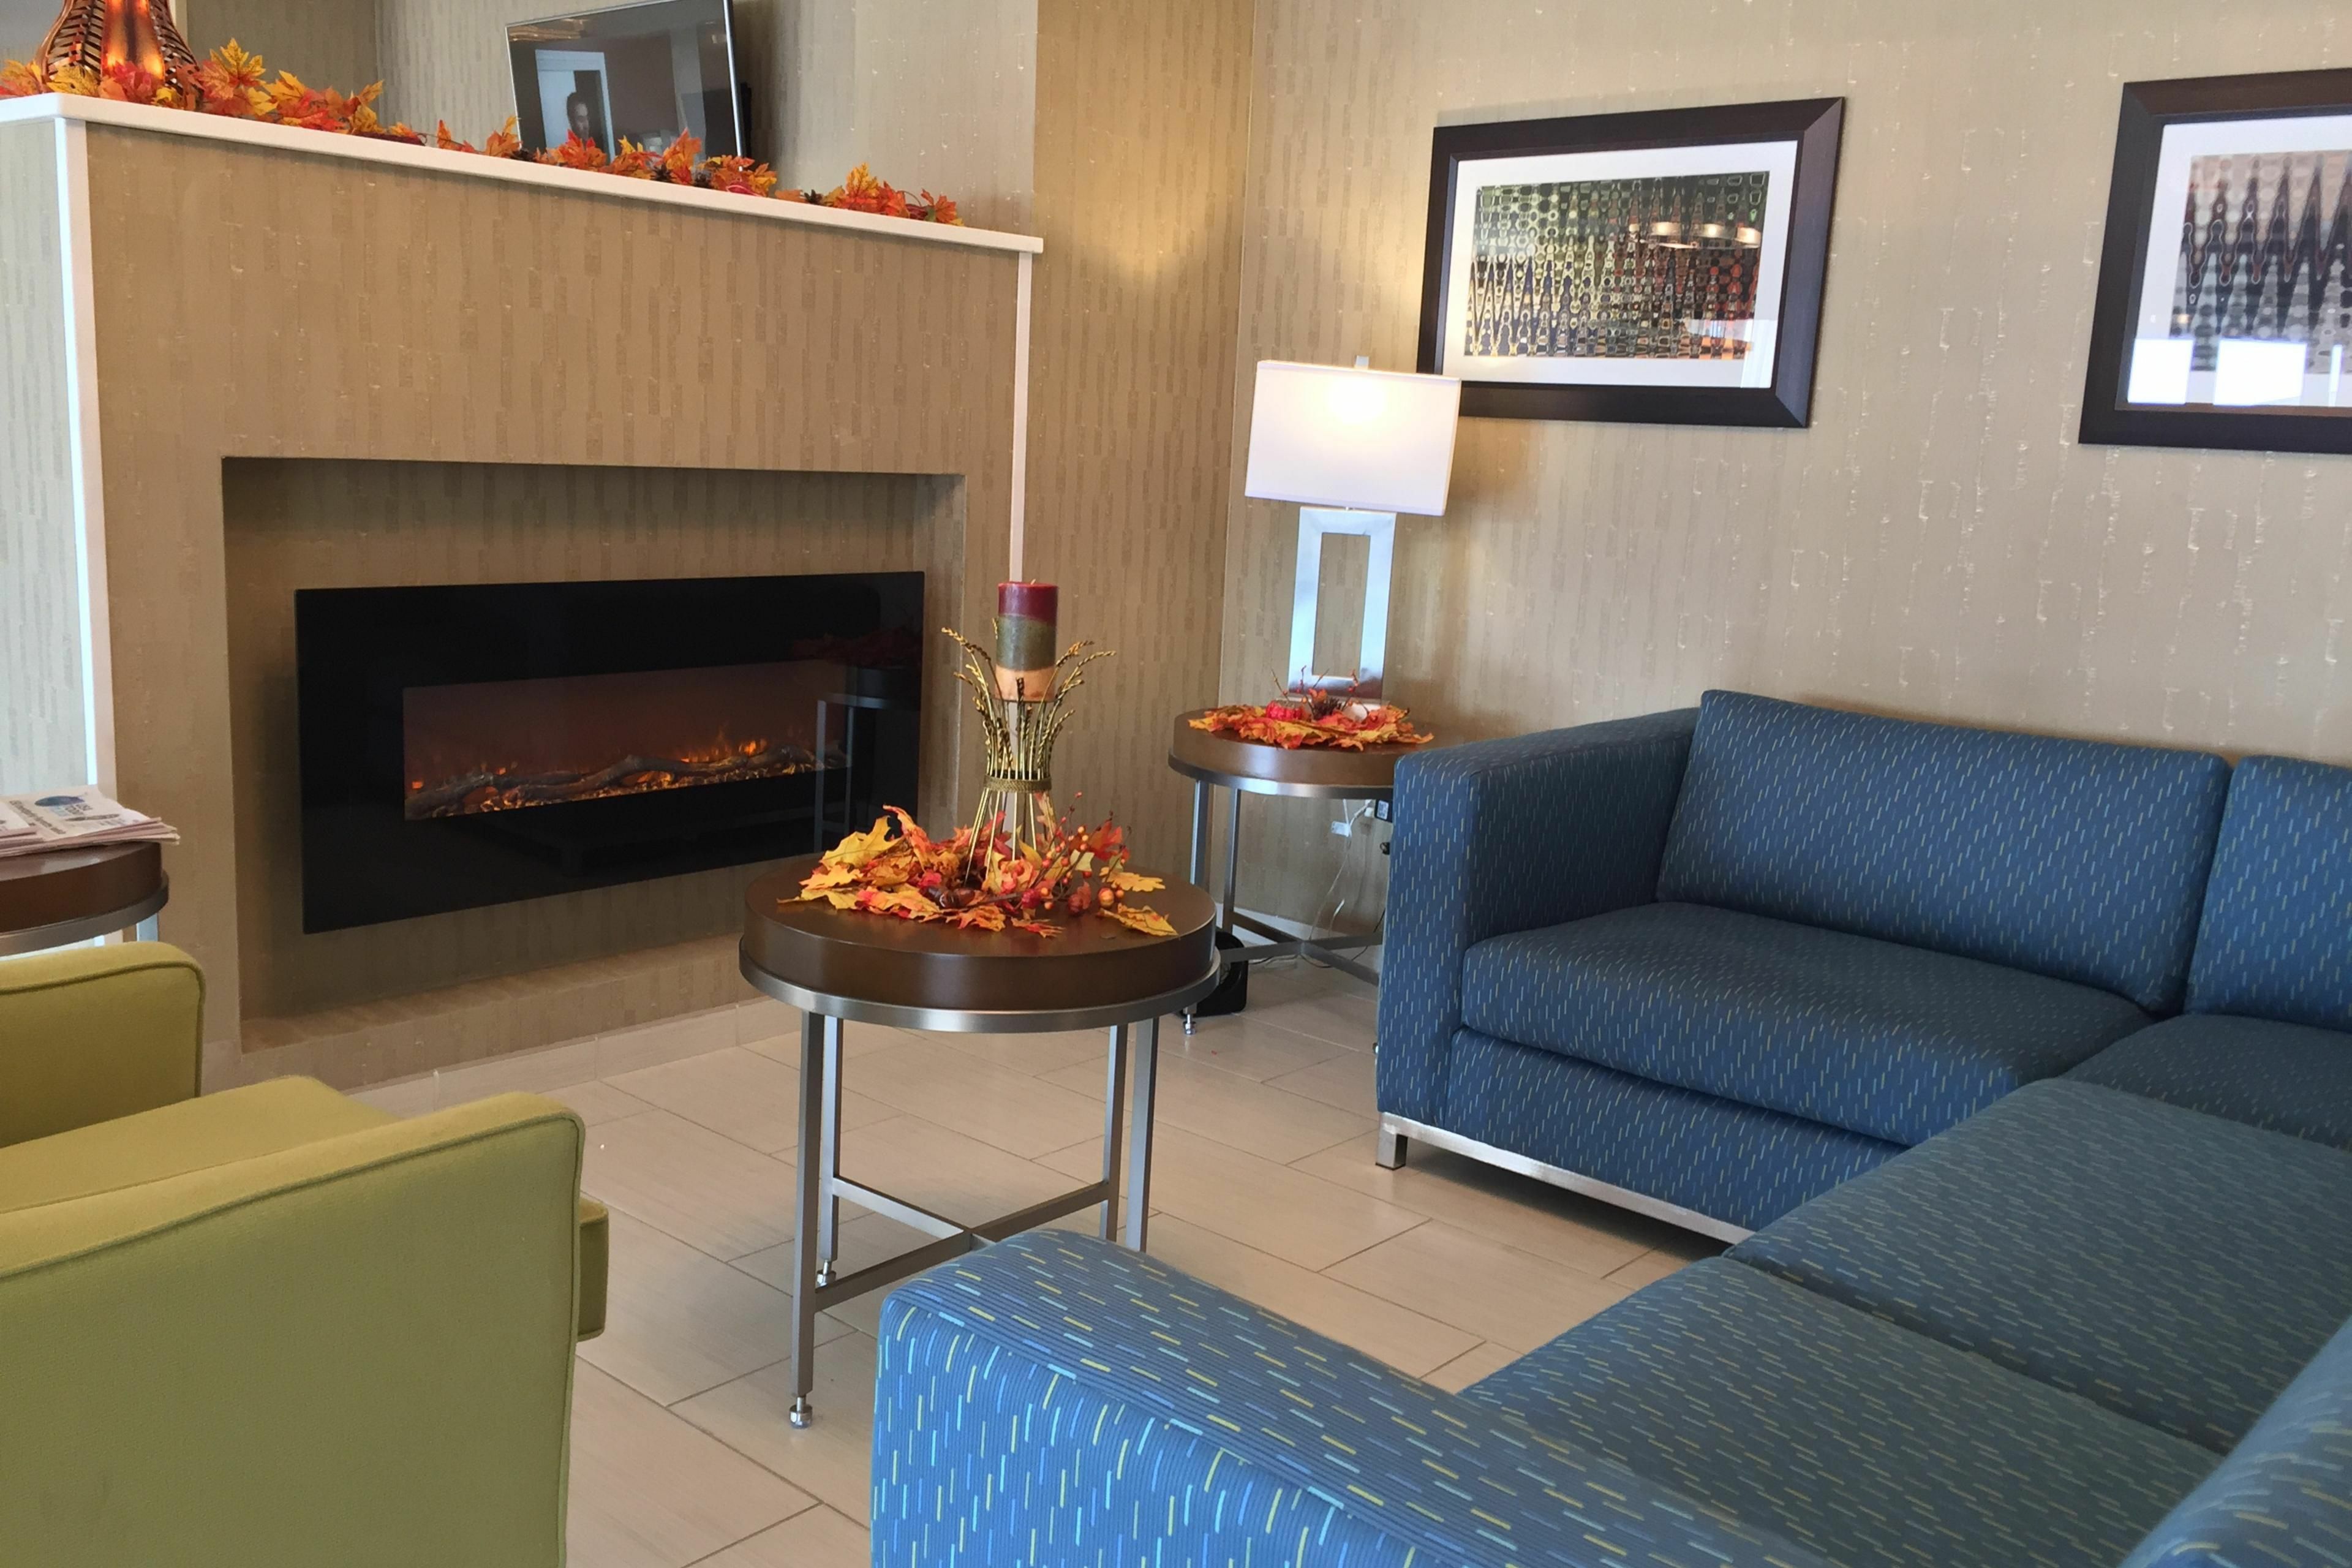 Photo of Holiday Inn Express Chicago NW - Arlington Heights, Arlington Heights, IL